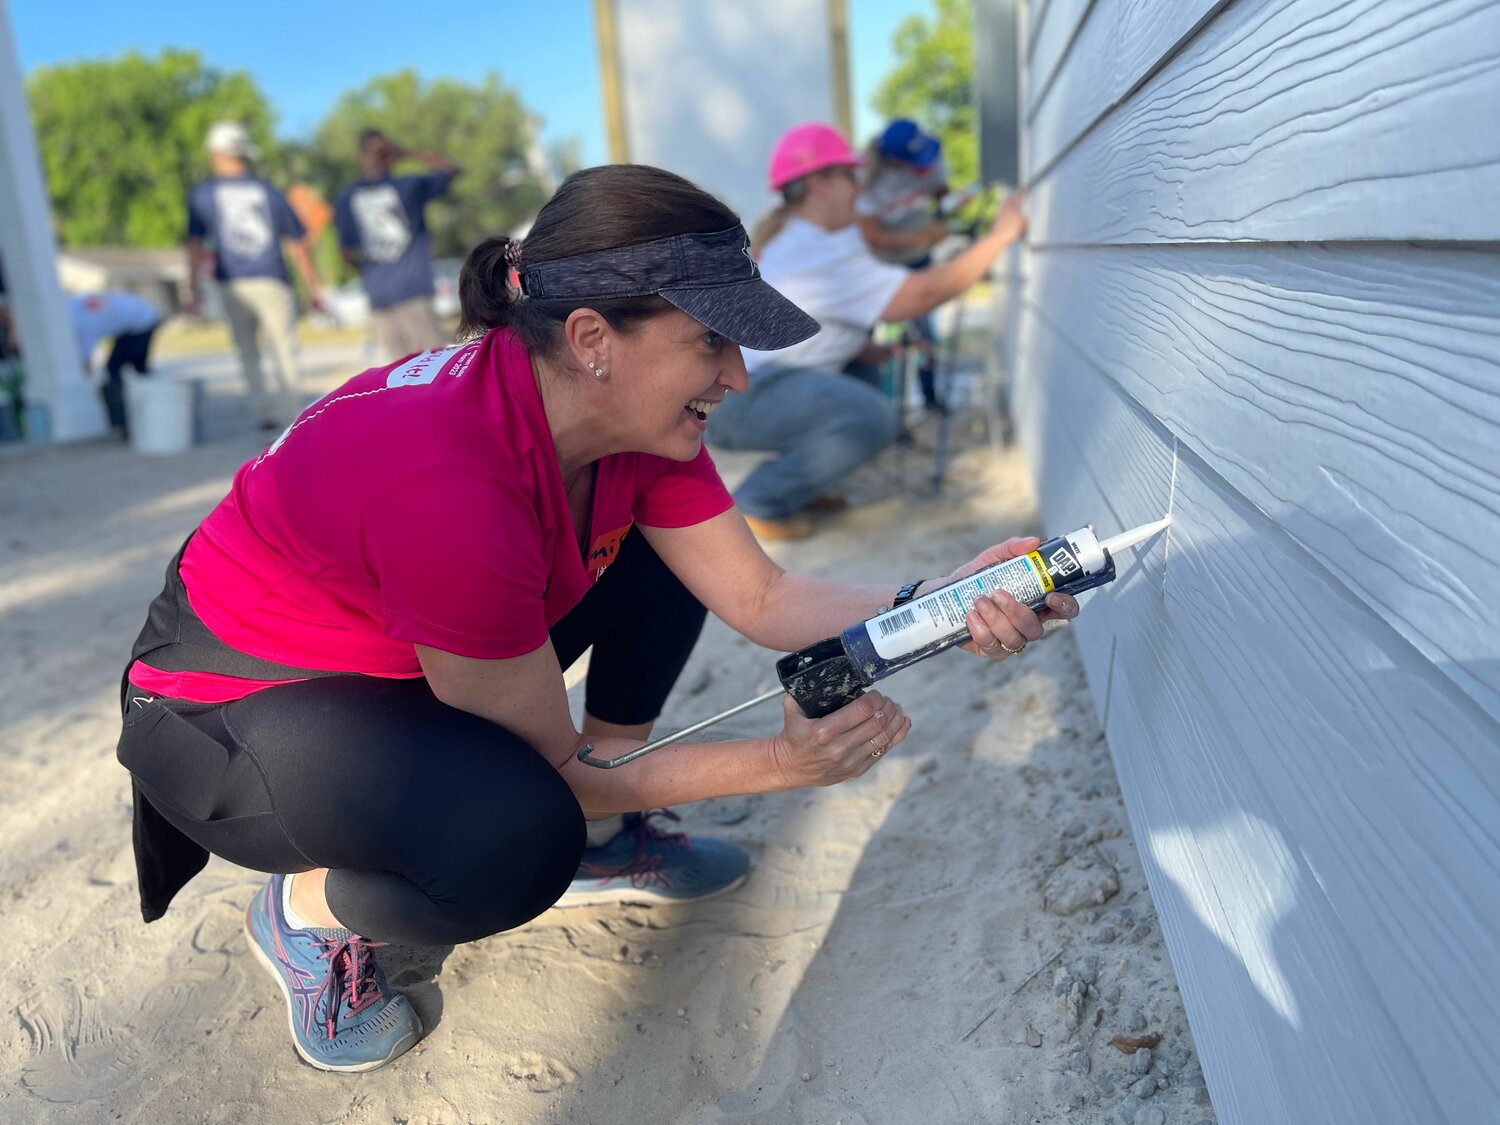 Jennifer Finfrock adds the sealing at the Women's Build event for the Seminole/Apopka Habitat for Humanity.